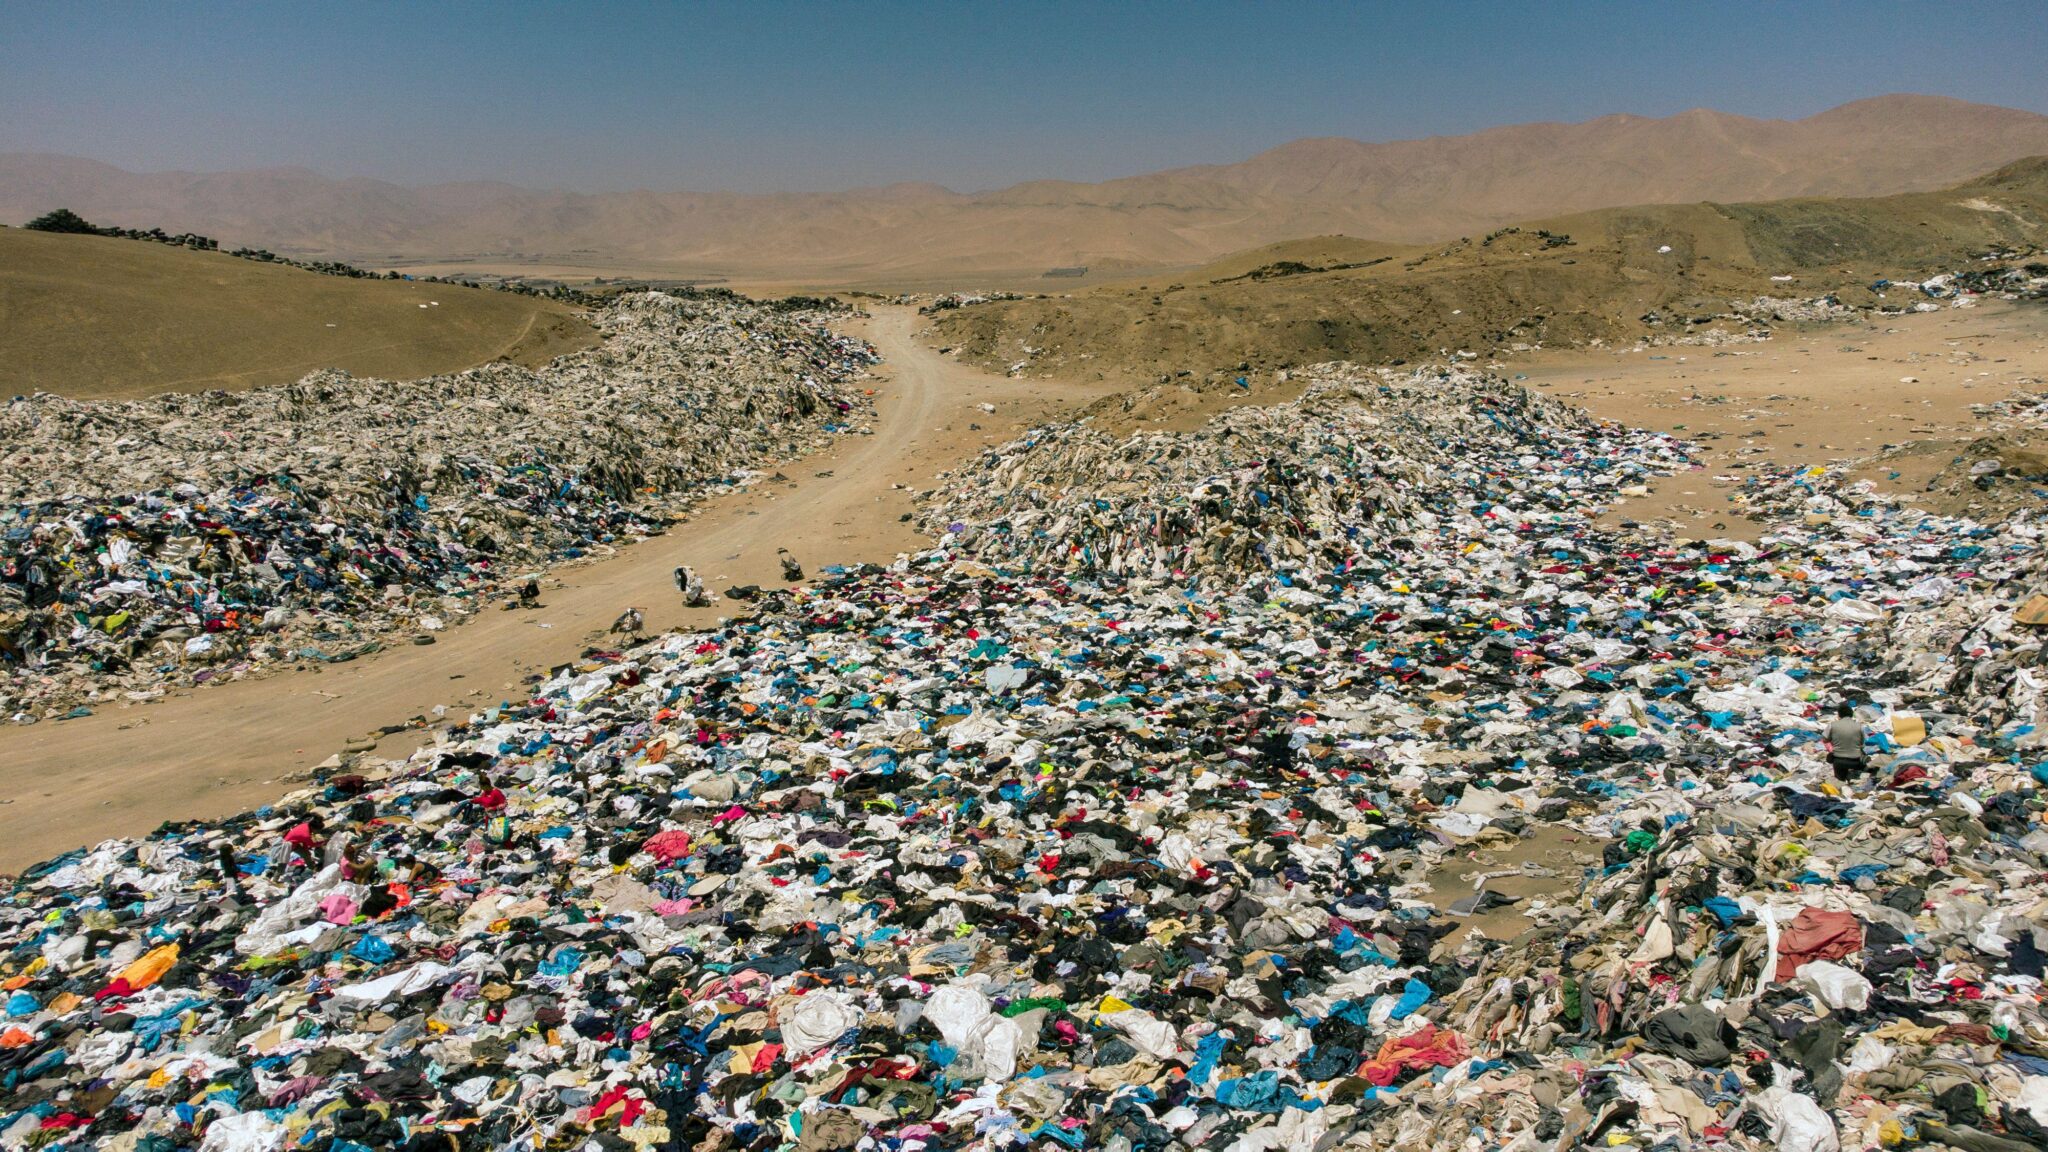 <wbr />View of used clothes discarded in the Atacama desert